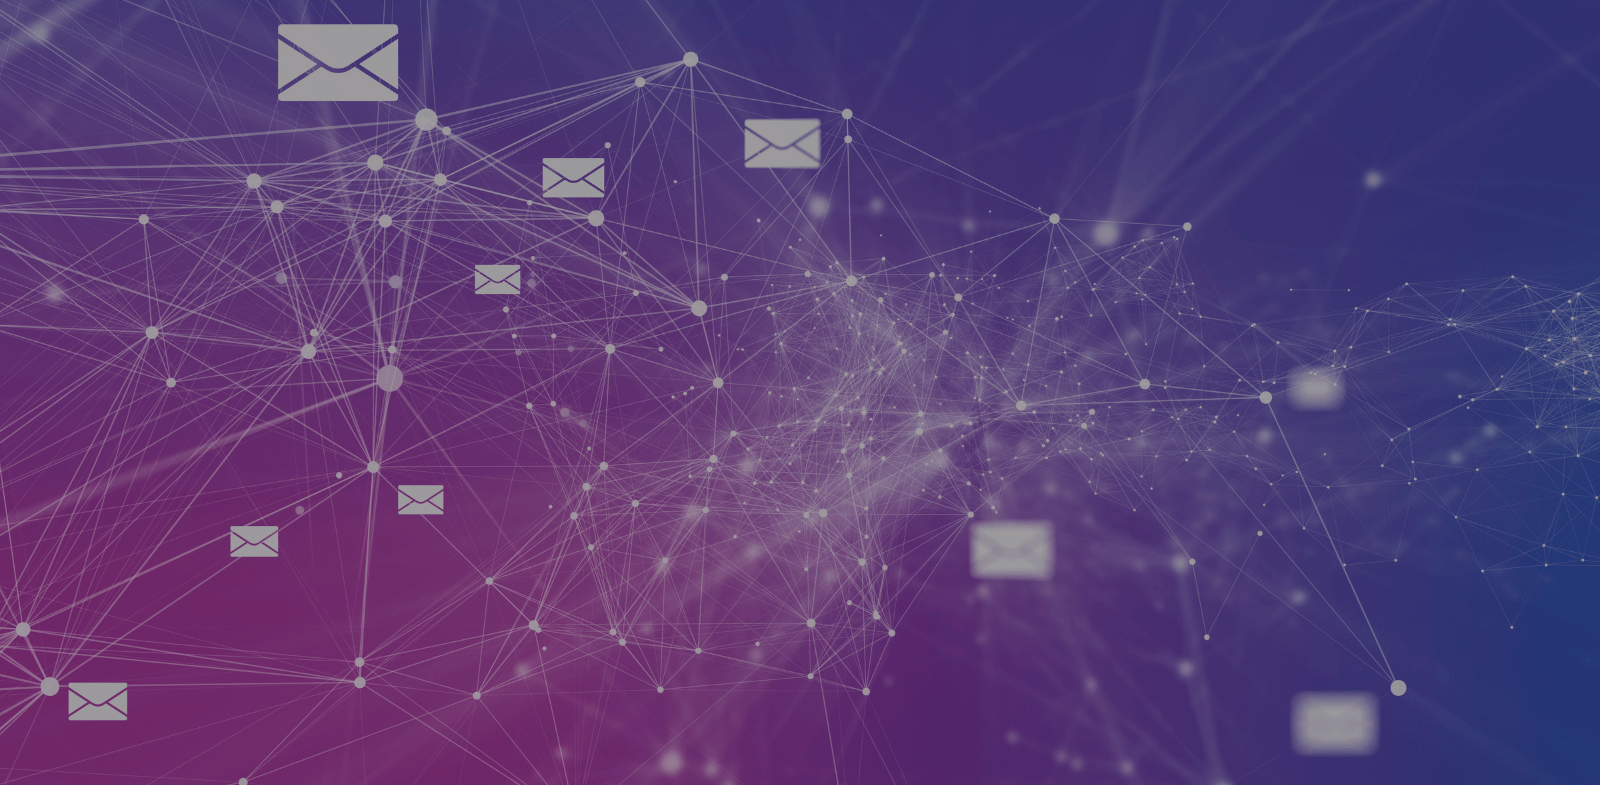 Abstract purple background with email icons